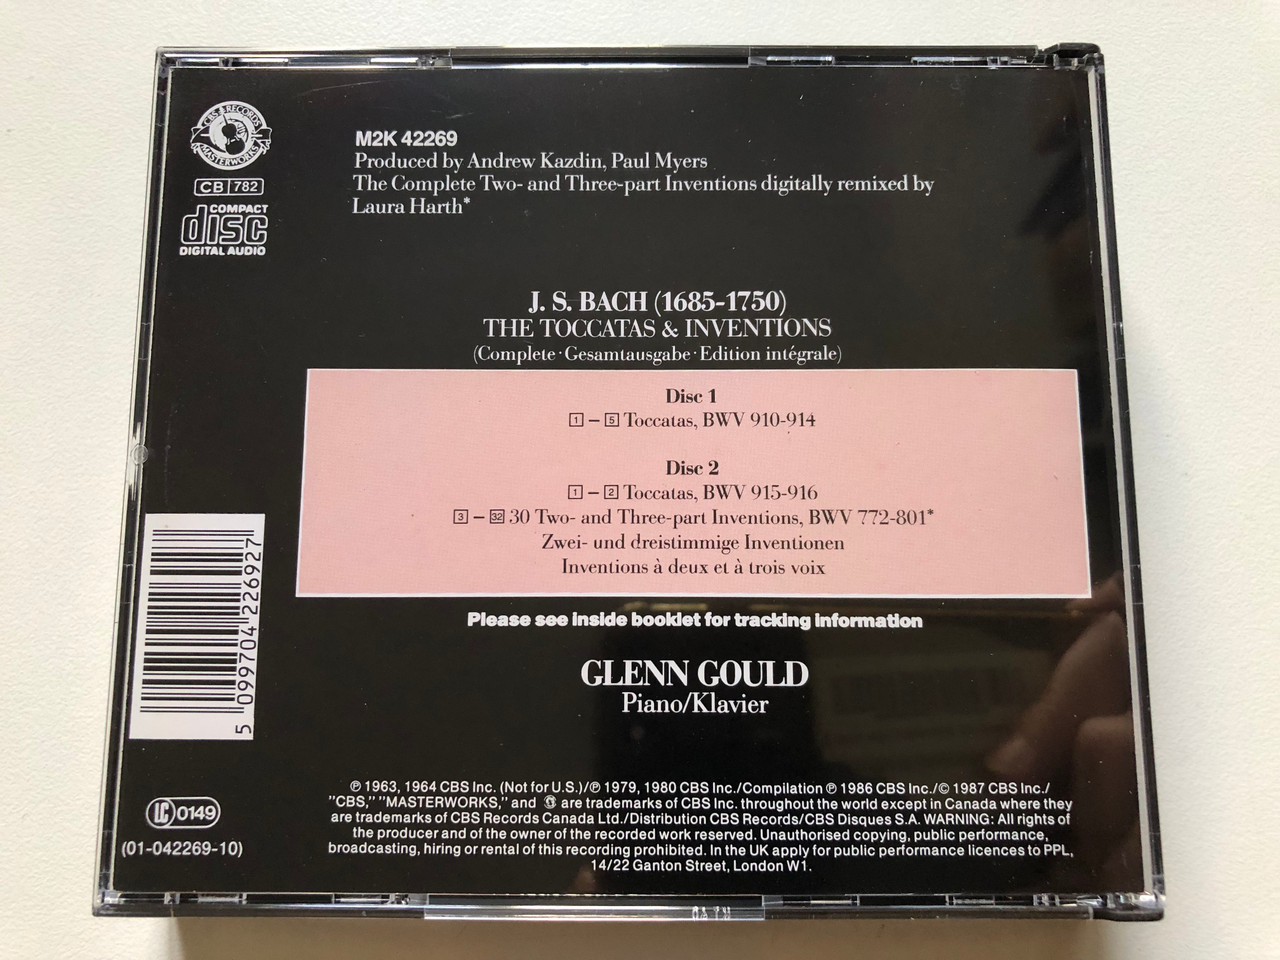 https://cdn10.bigcommerce.com/s-62bdpkt7pb/products/0/images/312467/Glenn_Gould_-_Bach_The_Toccatas_Inventions_CBS_Masterworks_2x_Audio_CD_1987_M2K_42269_2__11840.1700039292.1280.1280.JPG?c=2